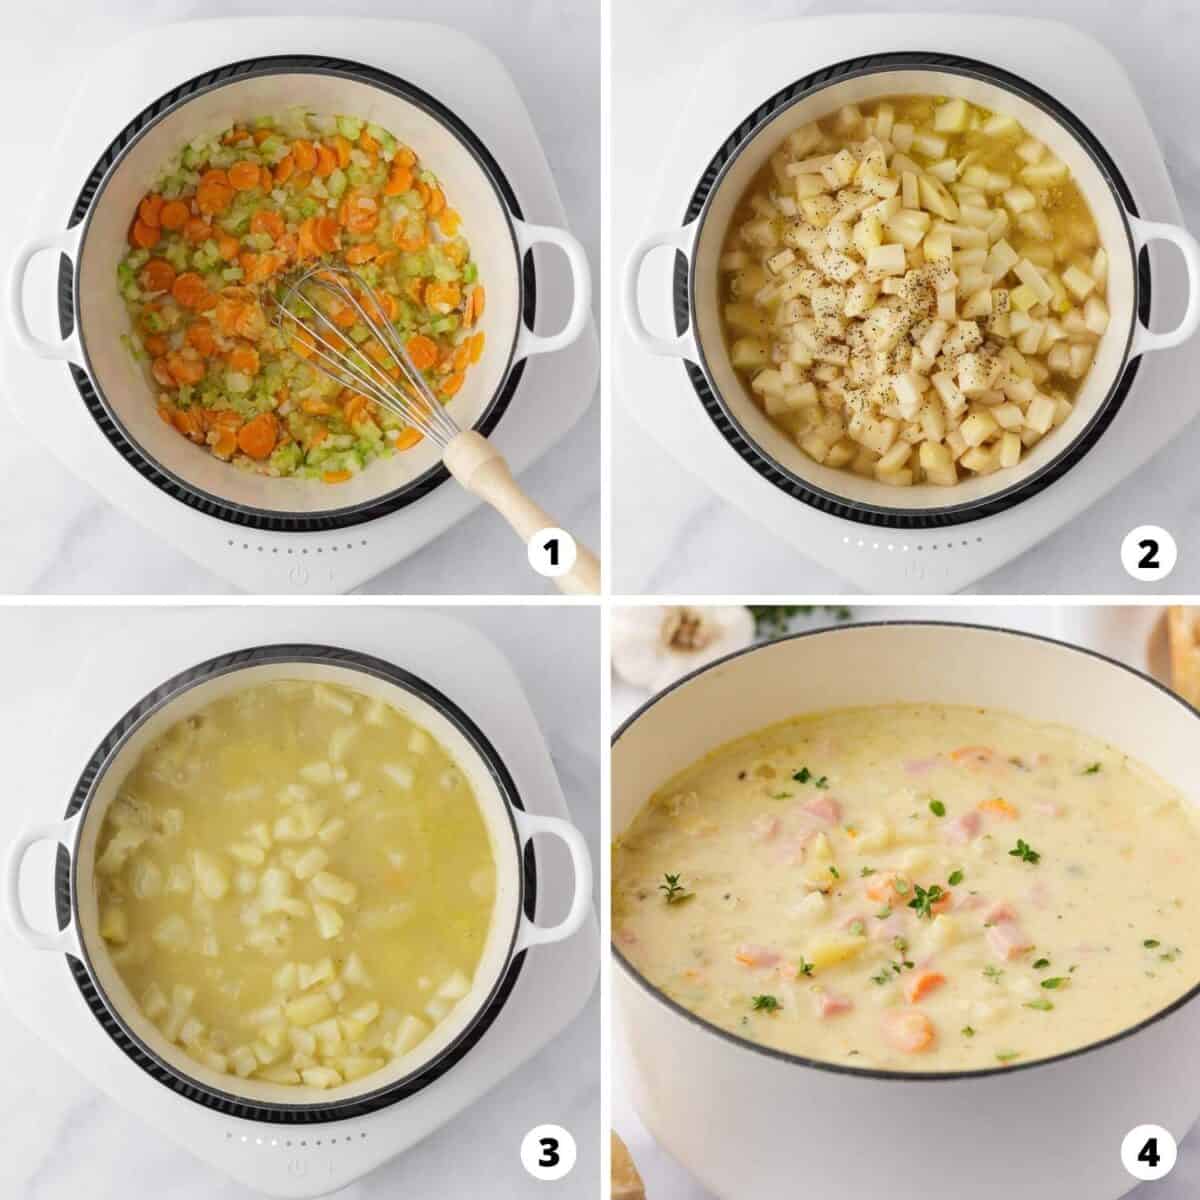 Showing how to make ham and potato soup in a 4 step collage.